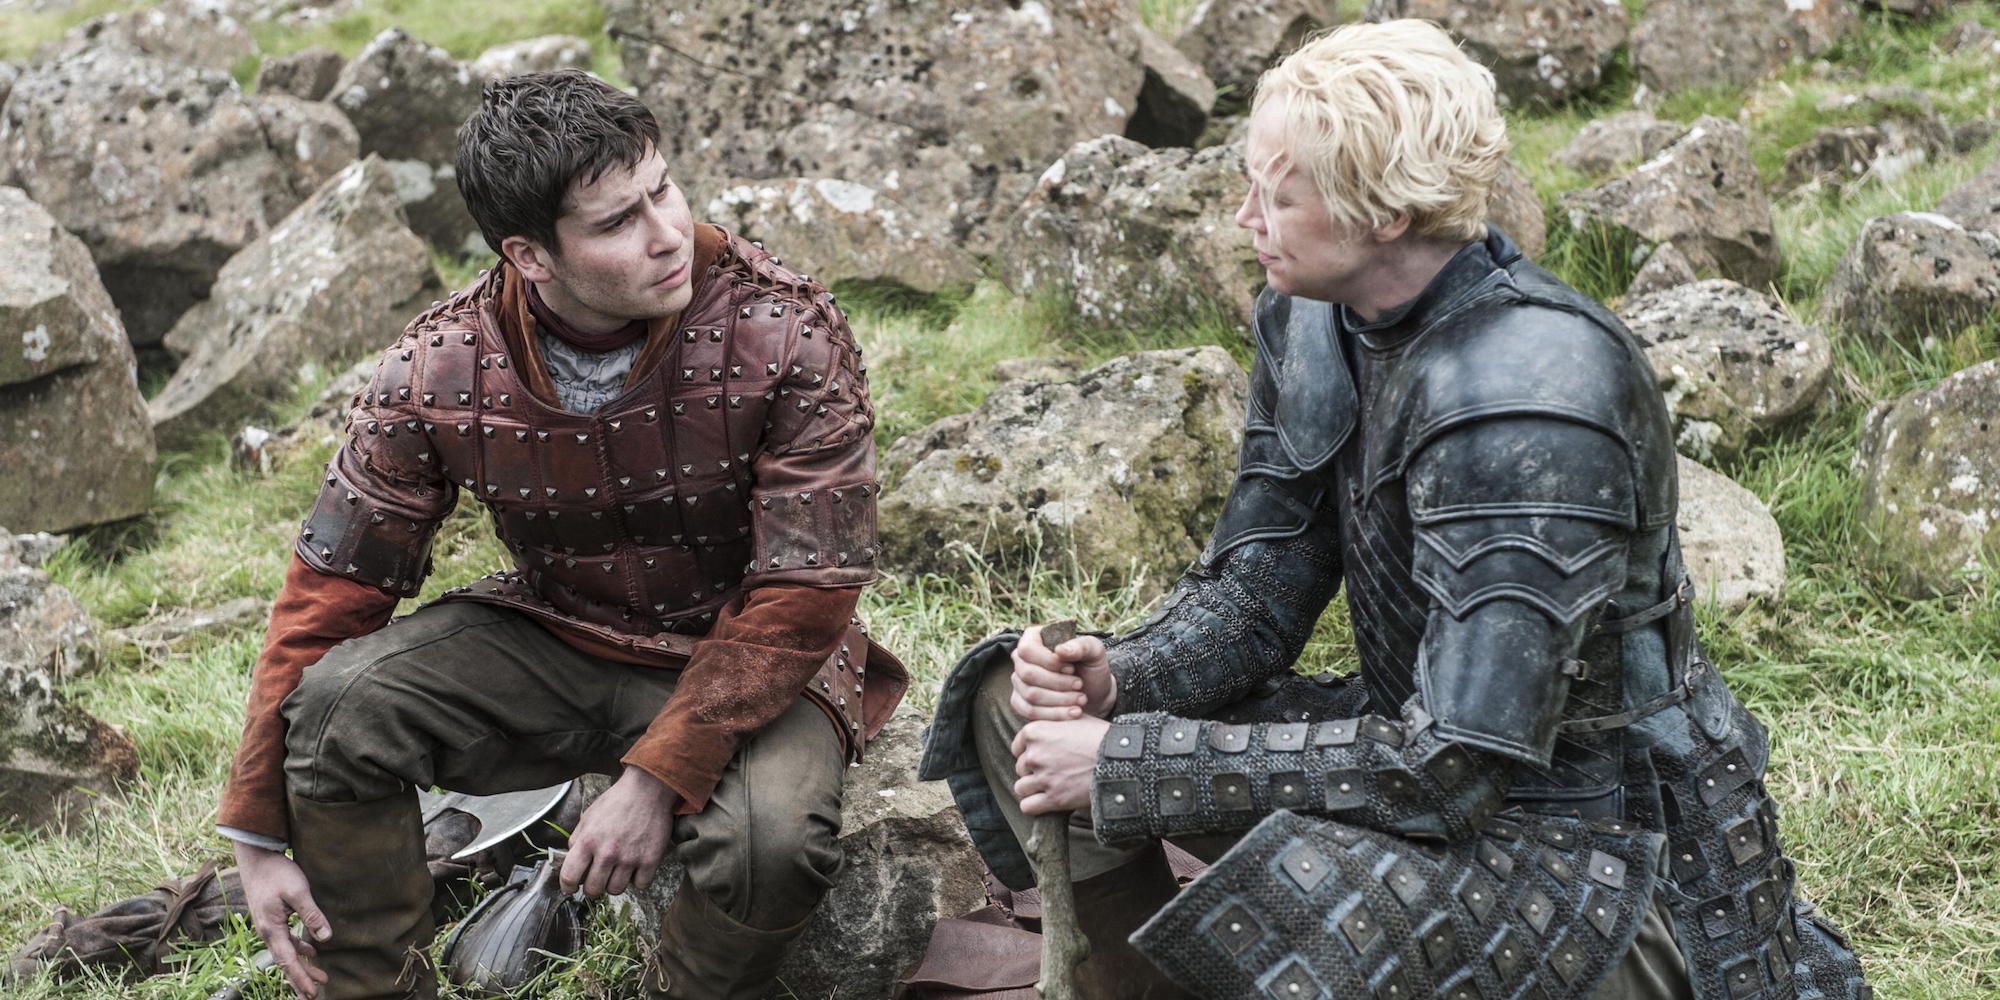 Brienne and Podrick talking in an open field in Game of Thrones.